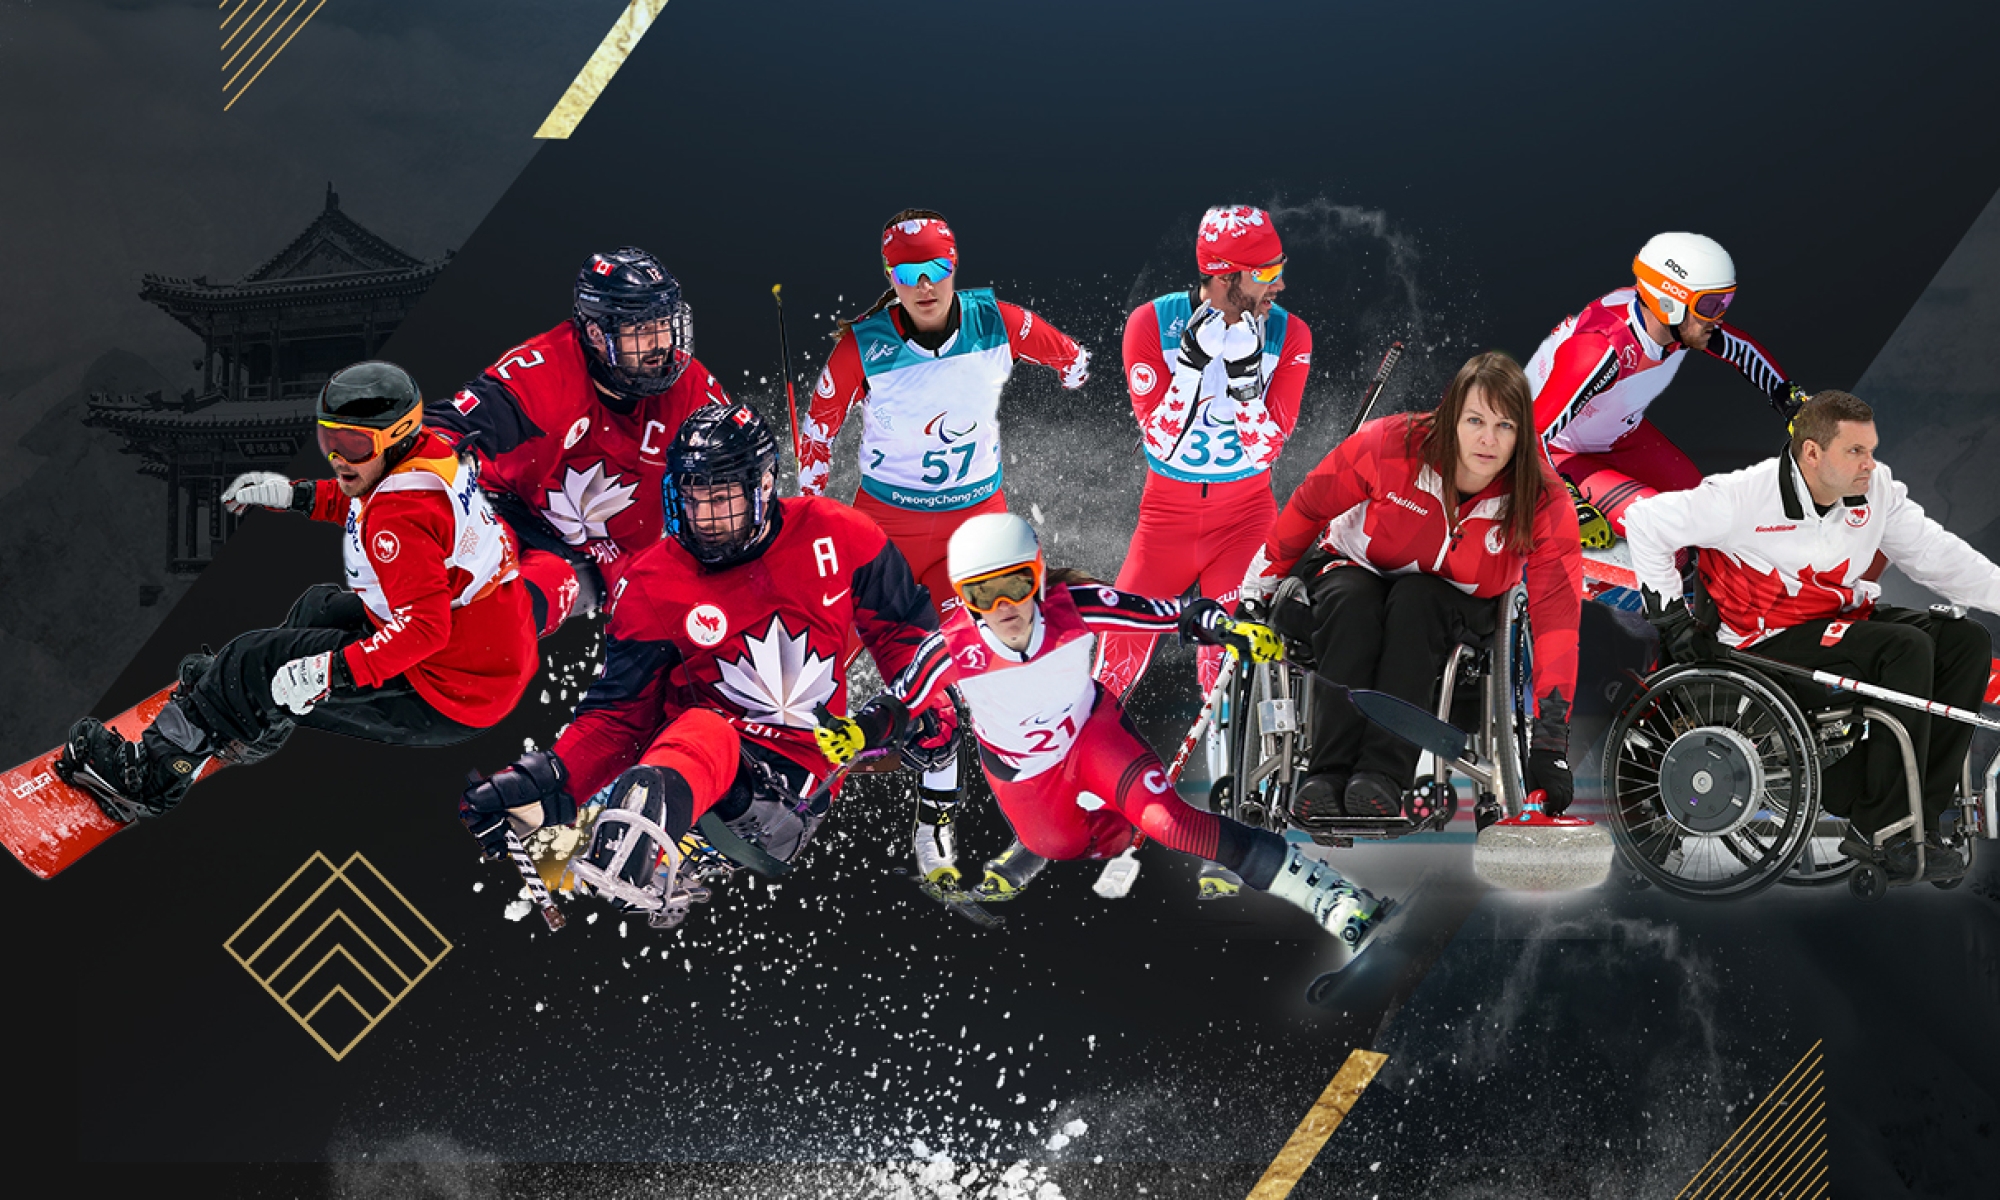 A bunch of athletes in red and white together in the middle representing many winter sports, black and gold Beijing theme background